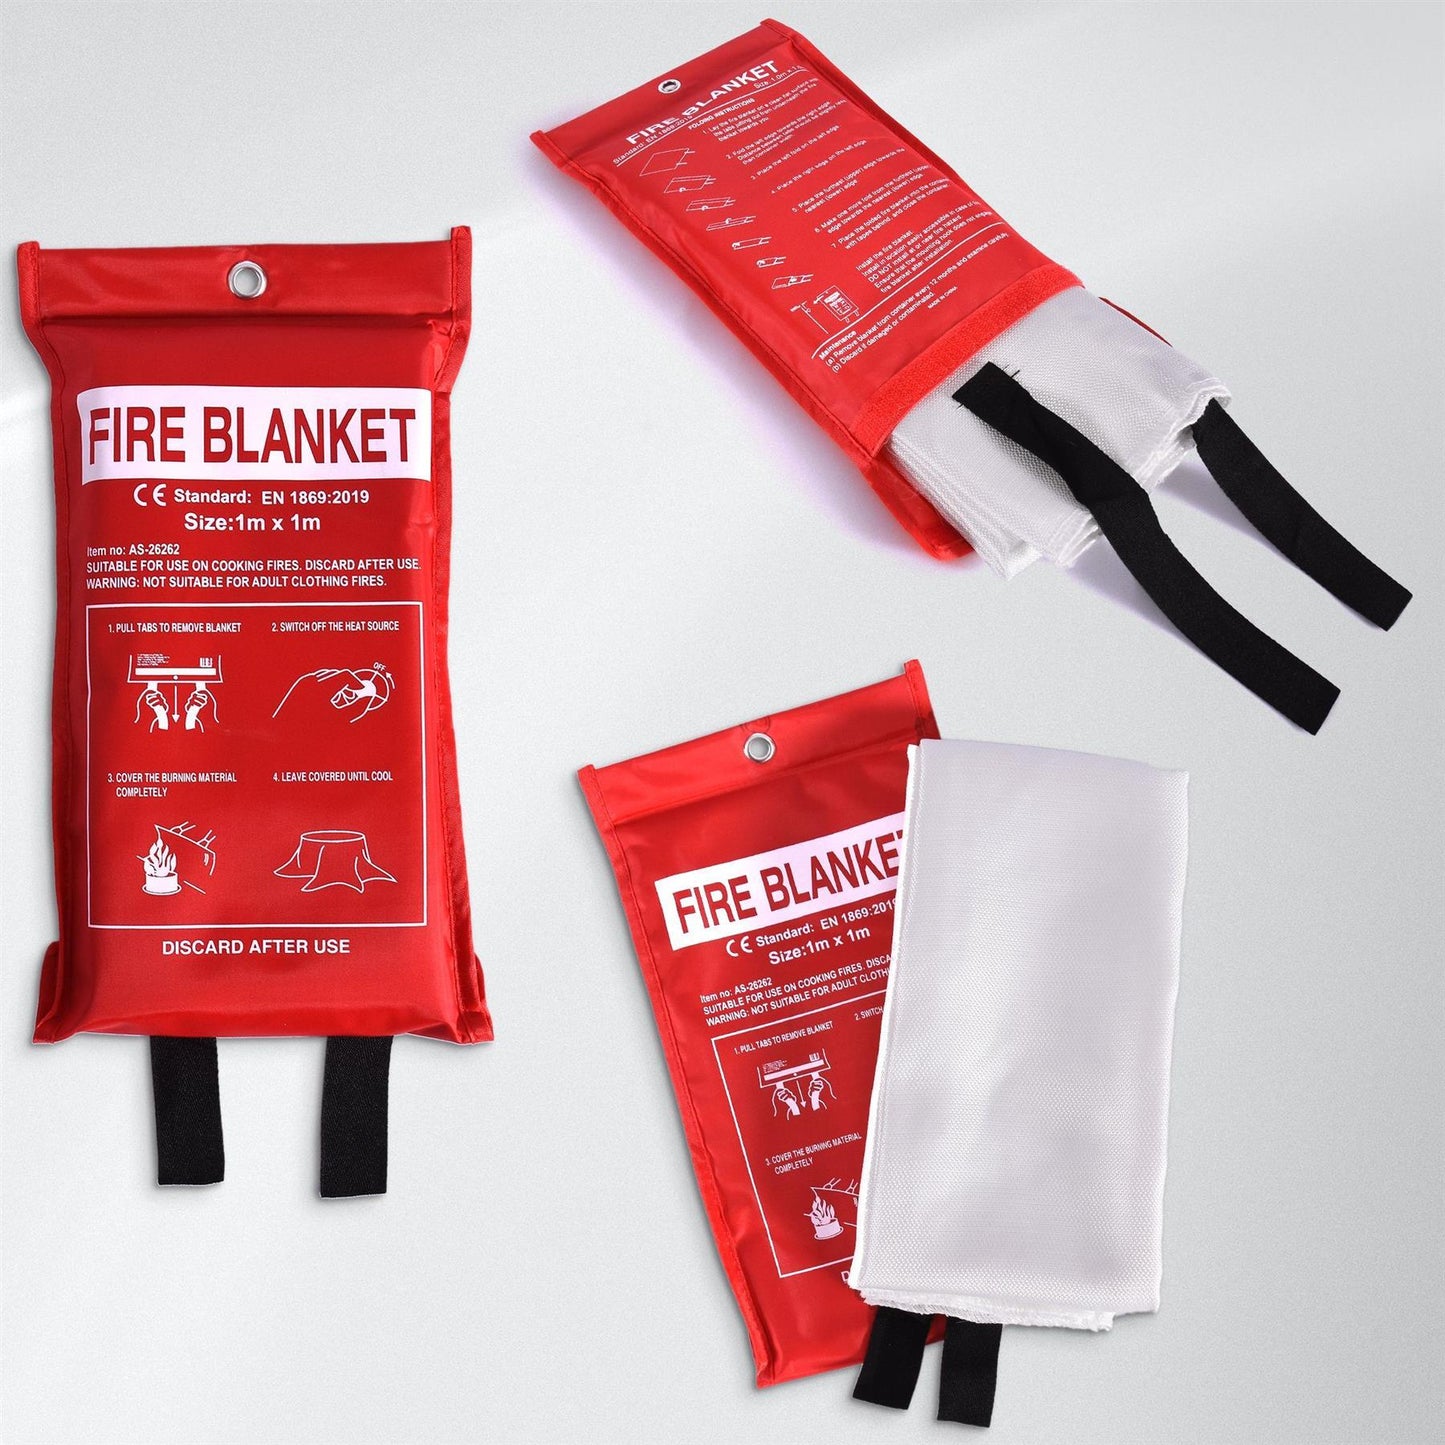 Large Home Fire Blanket (1M X 1M) For Safety